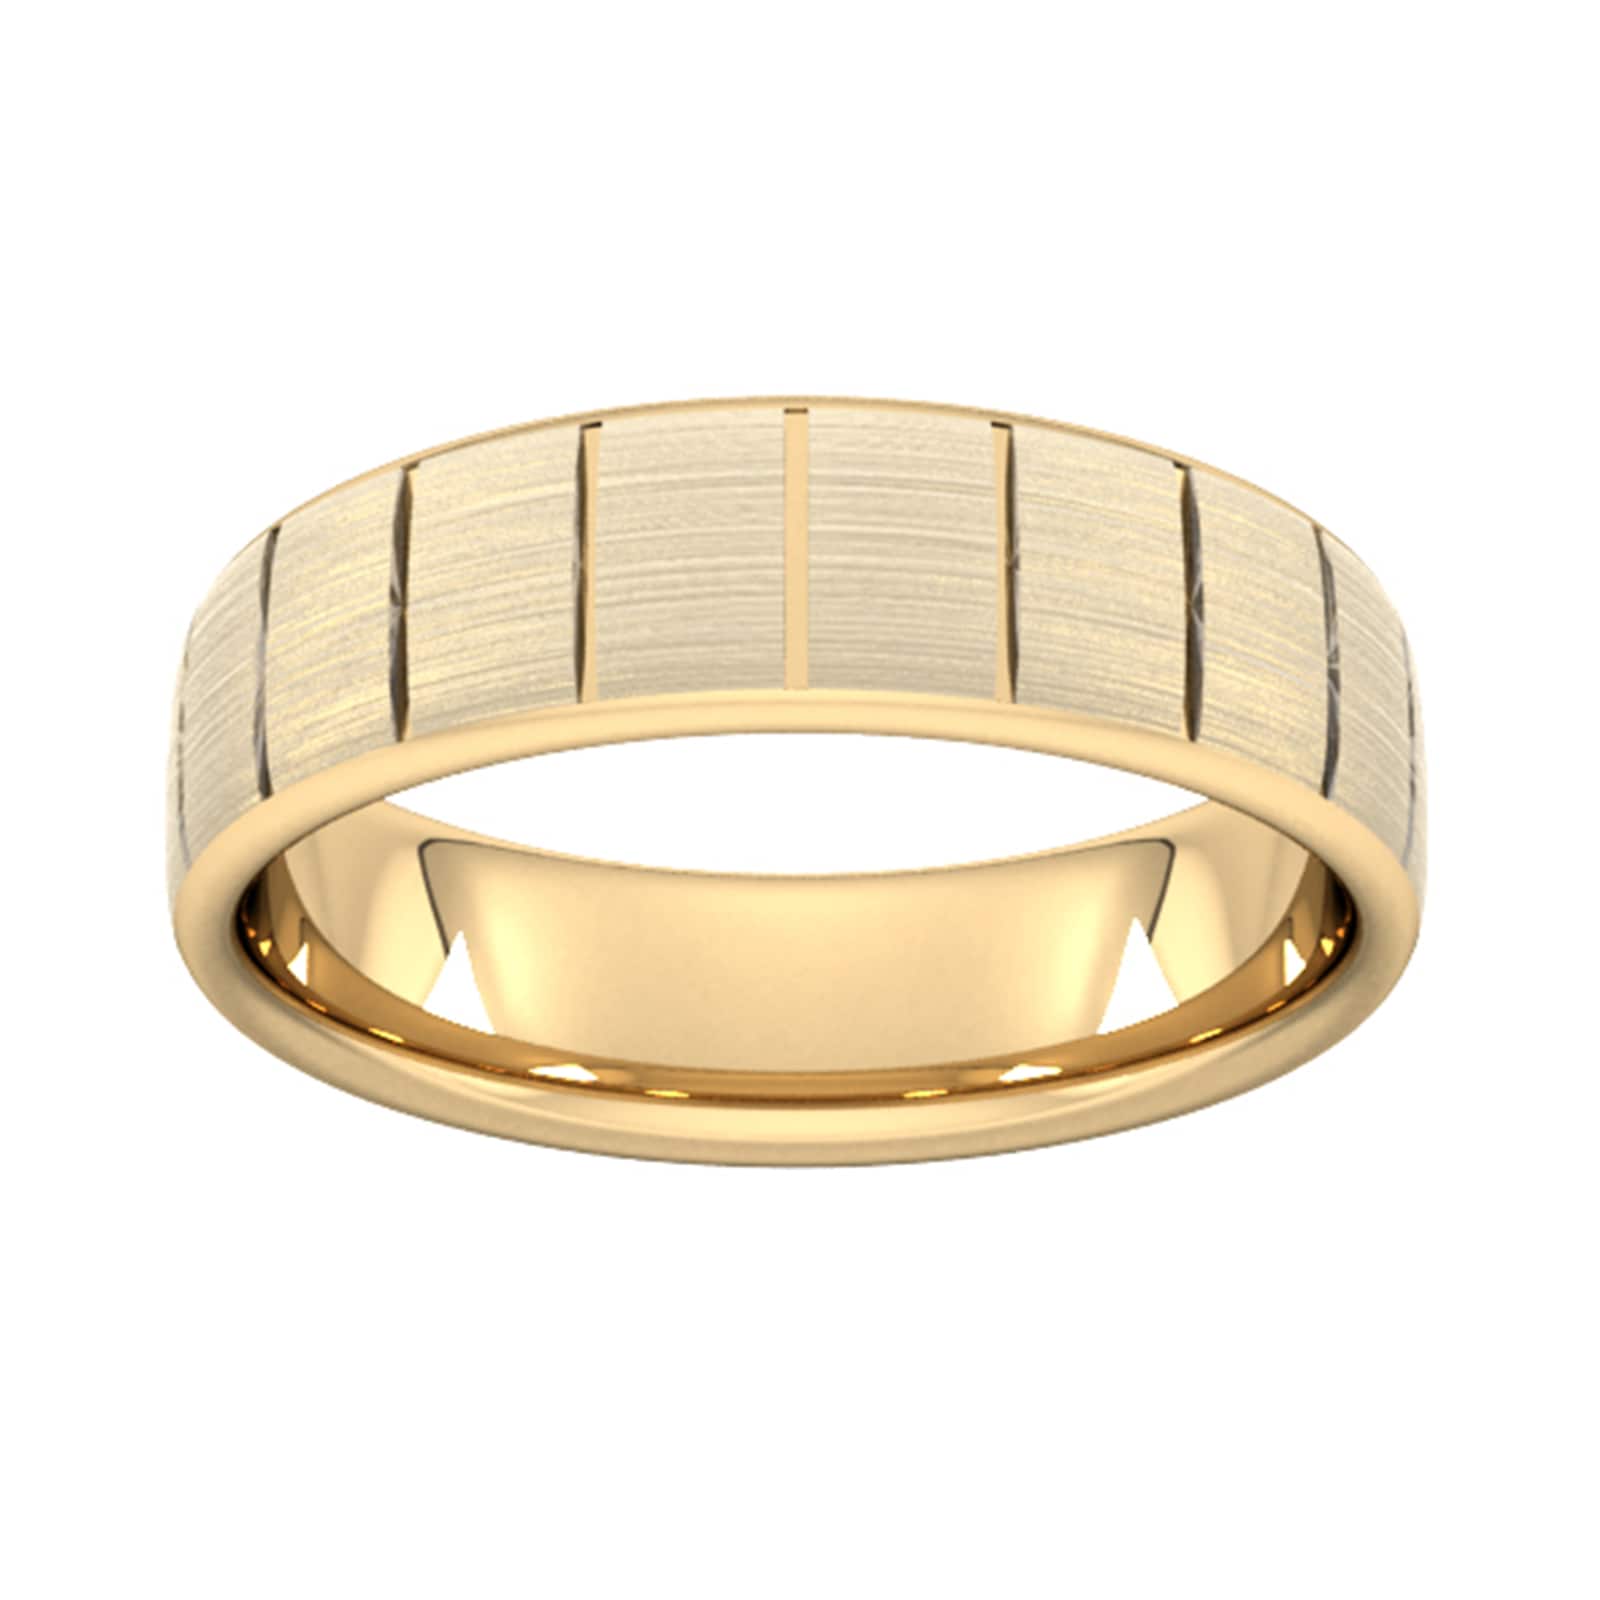 5mm Traditional Court Heavy Vertical Lines Wedding Ring In 9 Carat Yellow Gold - Ring Size P